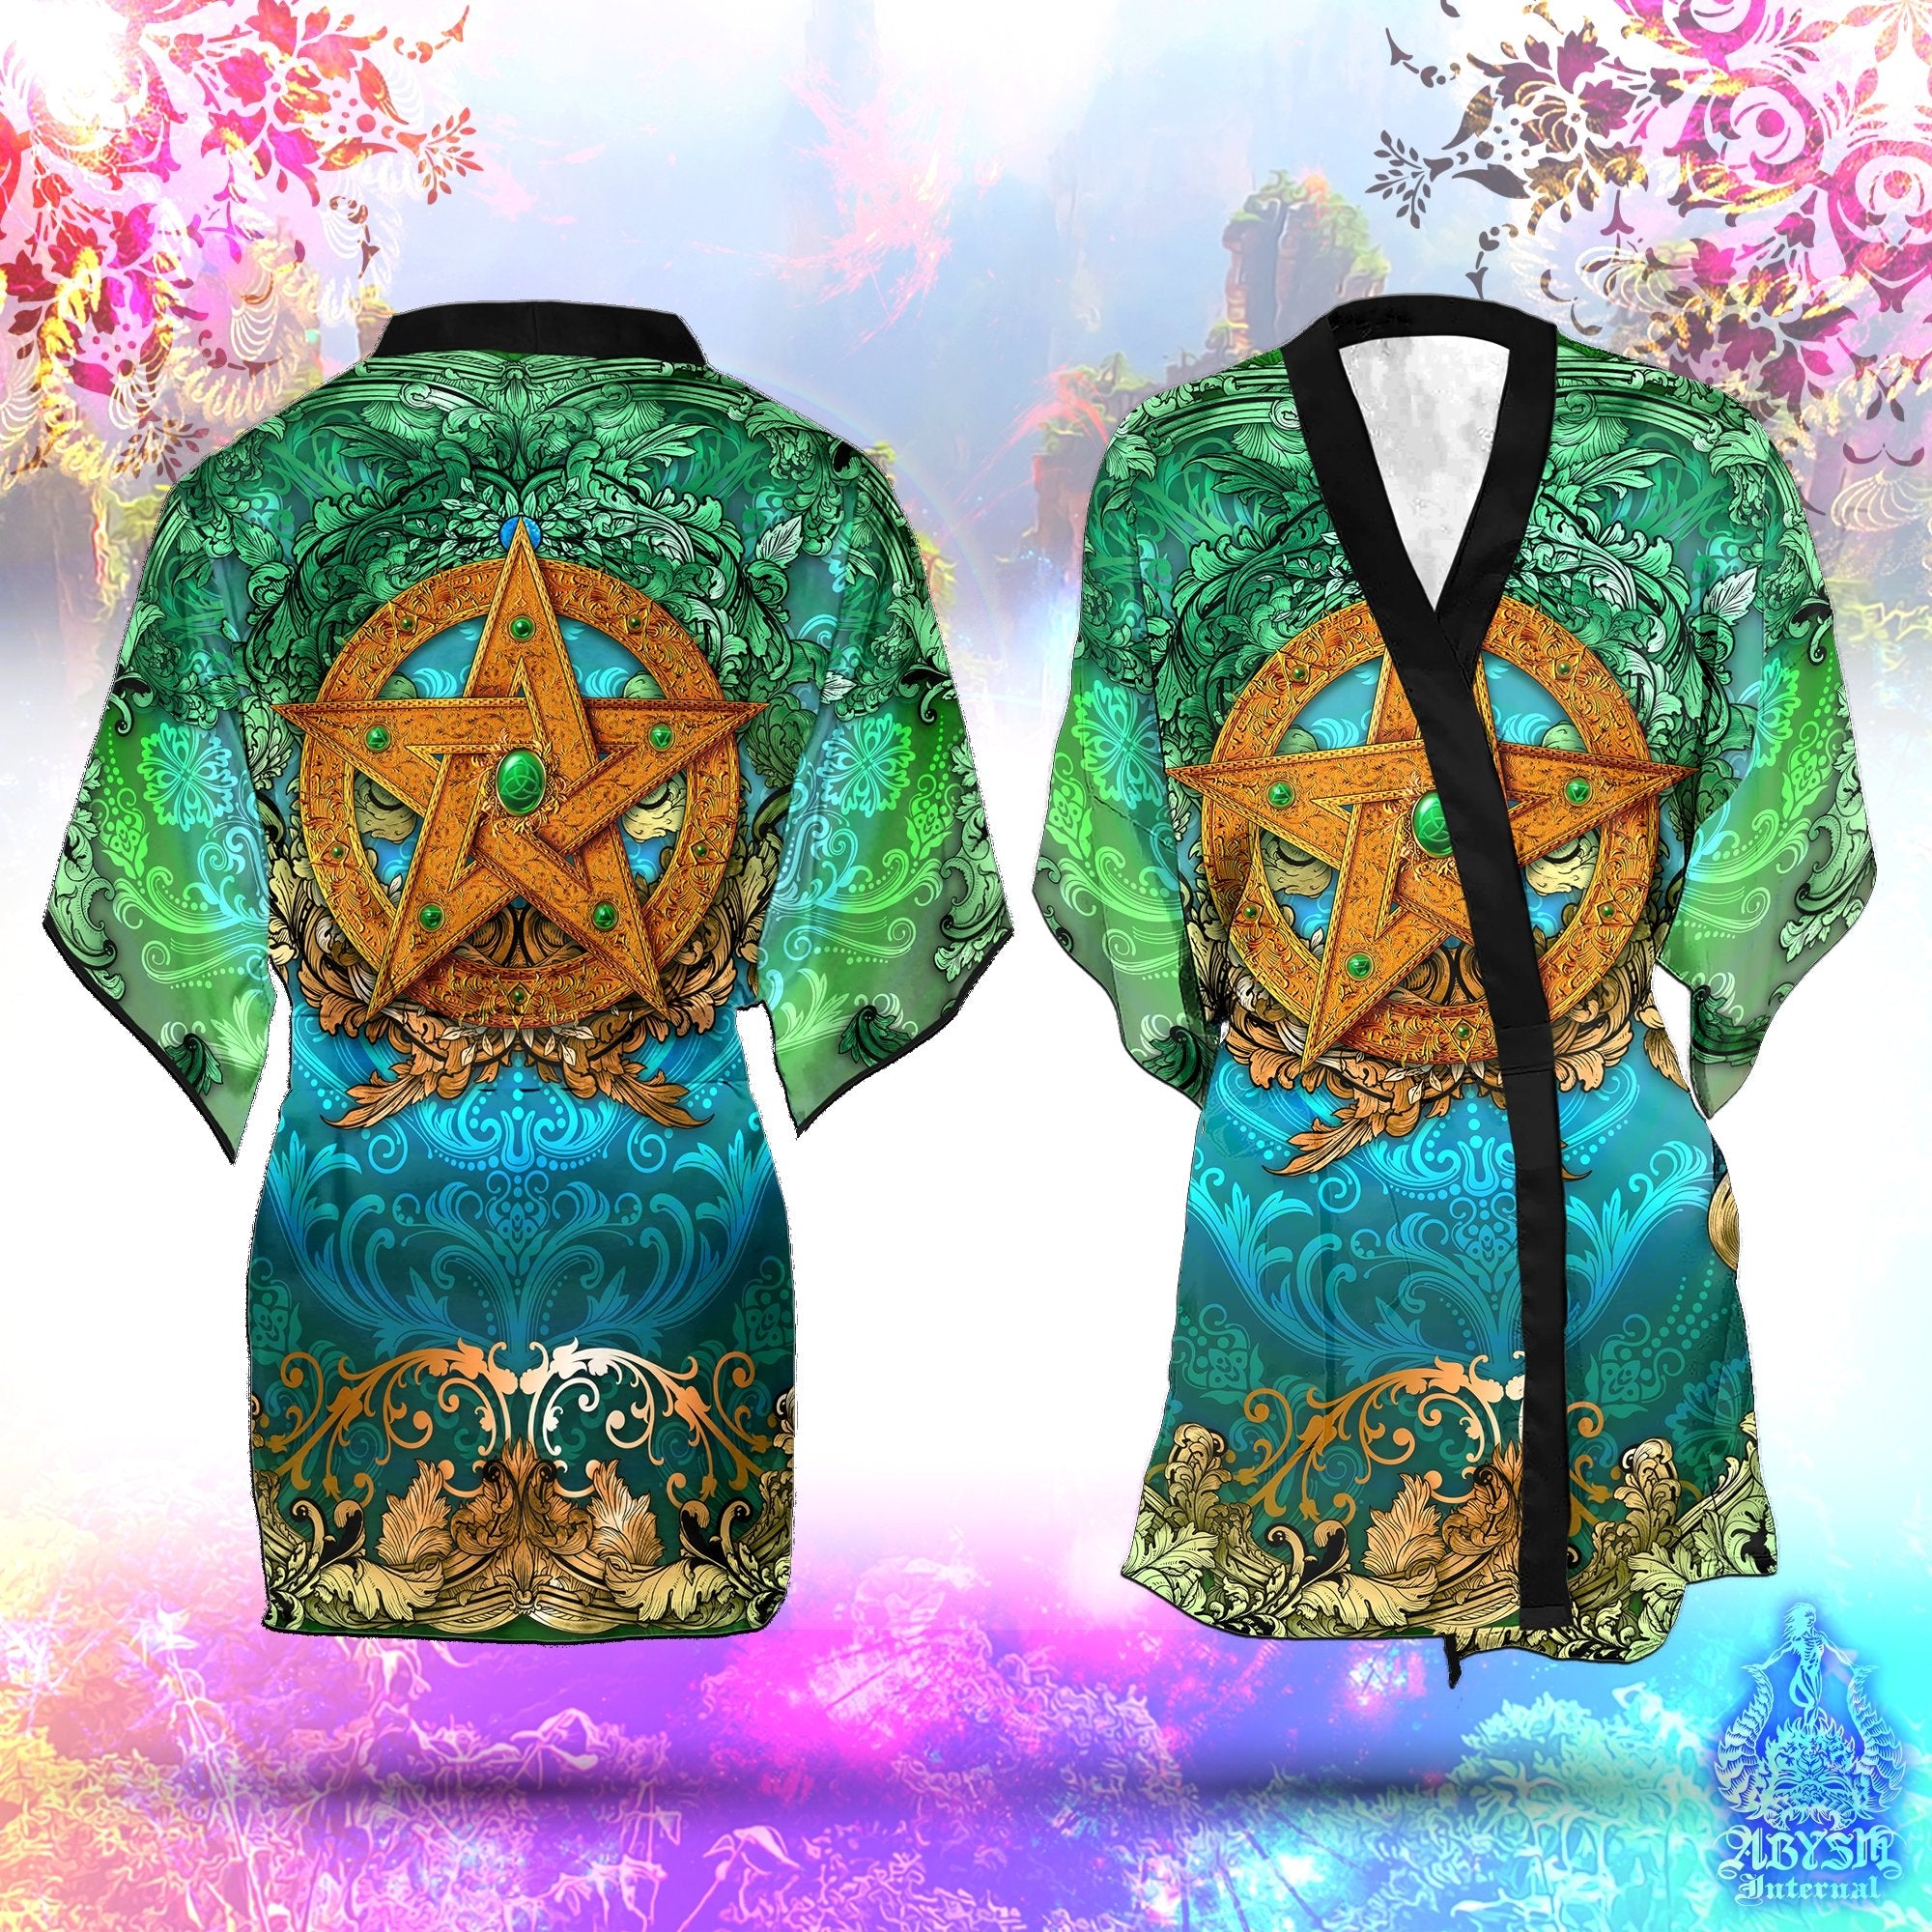 Pentacle Cover Up, Beach Outfit, Witch Party Kimono, Wicca Summer Festival Robe, Witchy Indie and Alternative Clothing, Unisex - Green - Abysm Internal